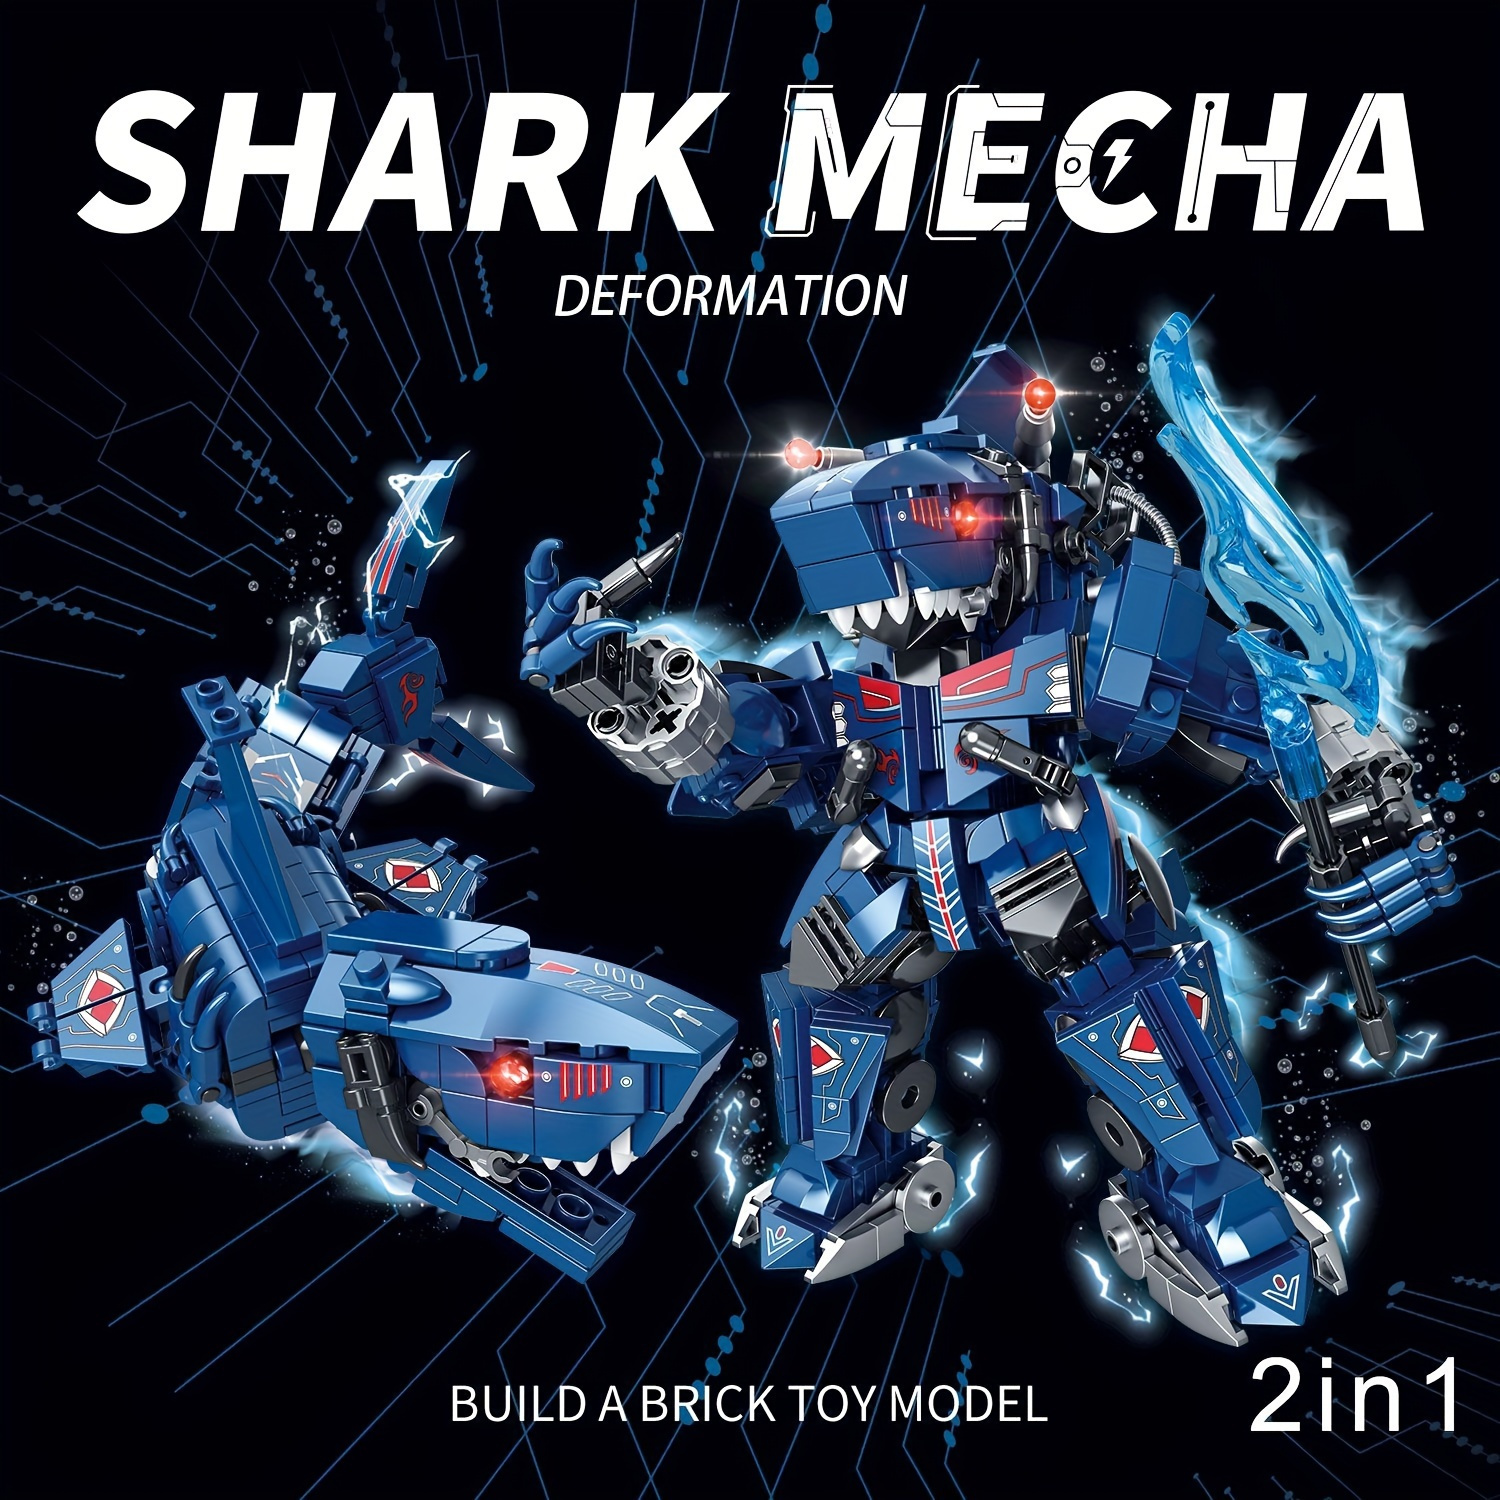 

Tagore Shark Mecha 588pcs Building Blocks Set, 2-in-1 Transformable Animal Theme Construction Toy, Non-toxic Abs Material, Educational Focus On Concentration, Ideal For Kids Ages 6-8